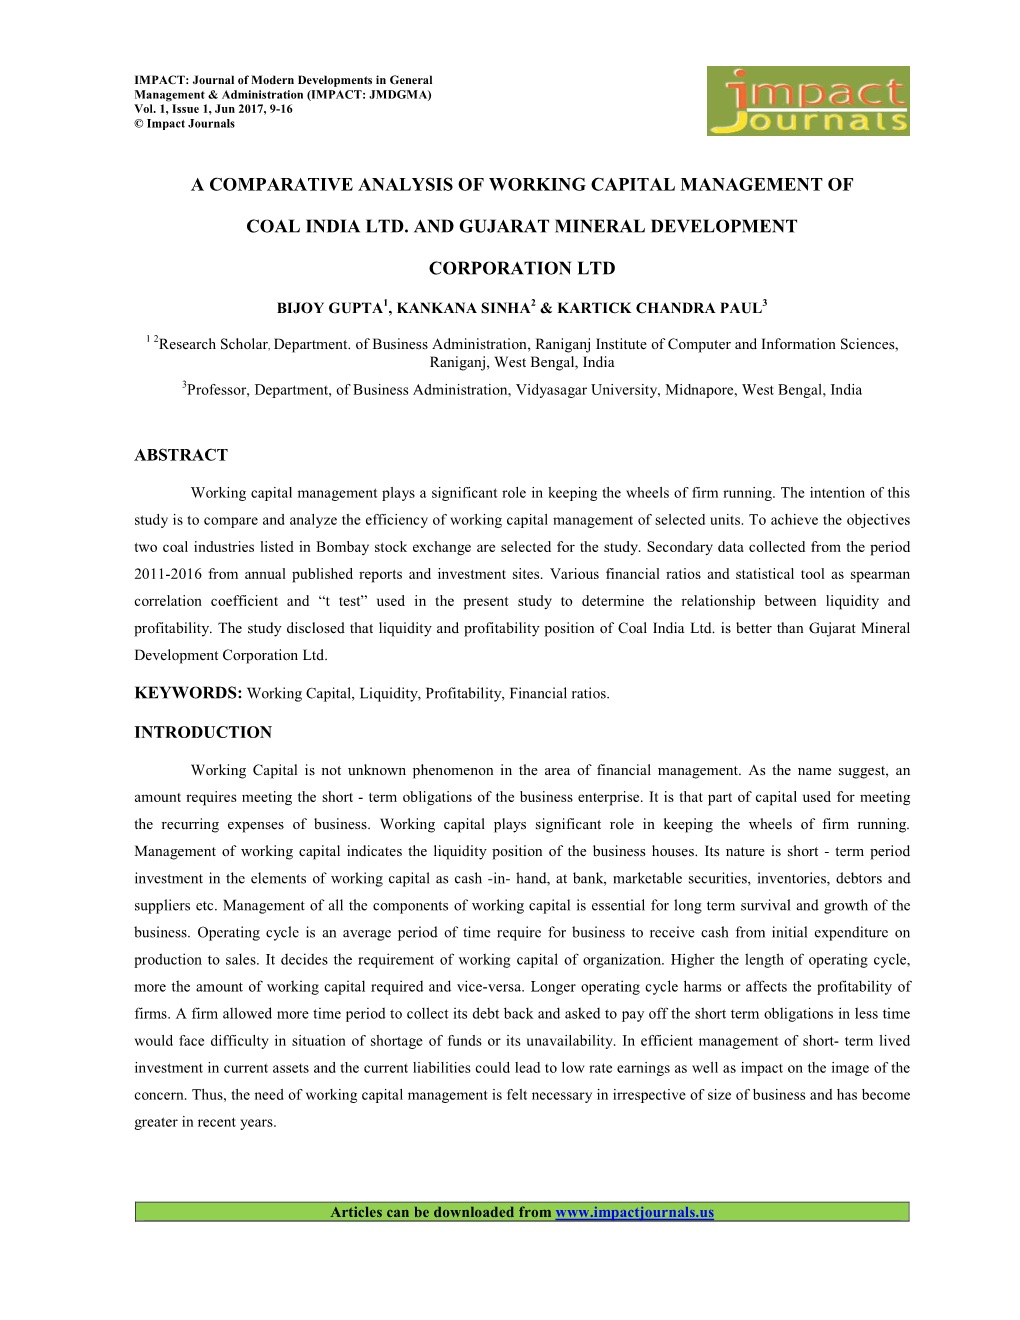 A Comparative Analysis of Working Capital Management of Coal India Ltd